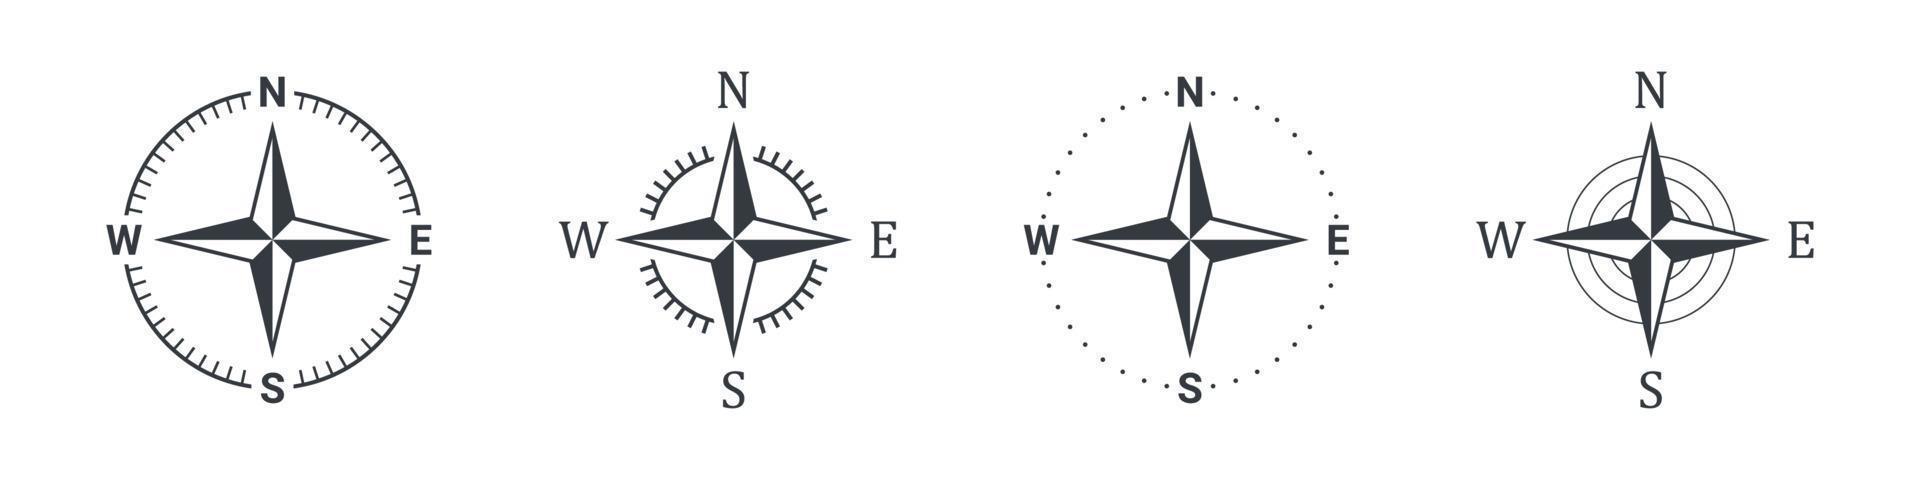 Compass icons. Navigation equipment sign. Compass direction sign. Wind rose icon. Vector illustration